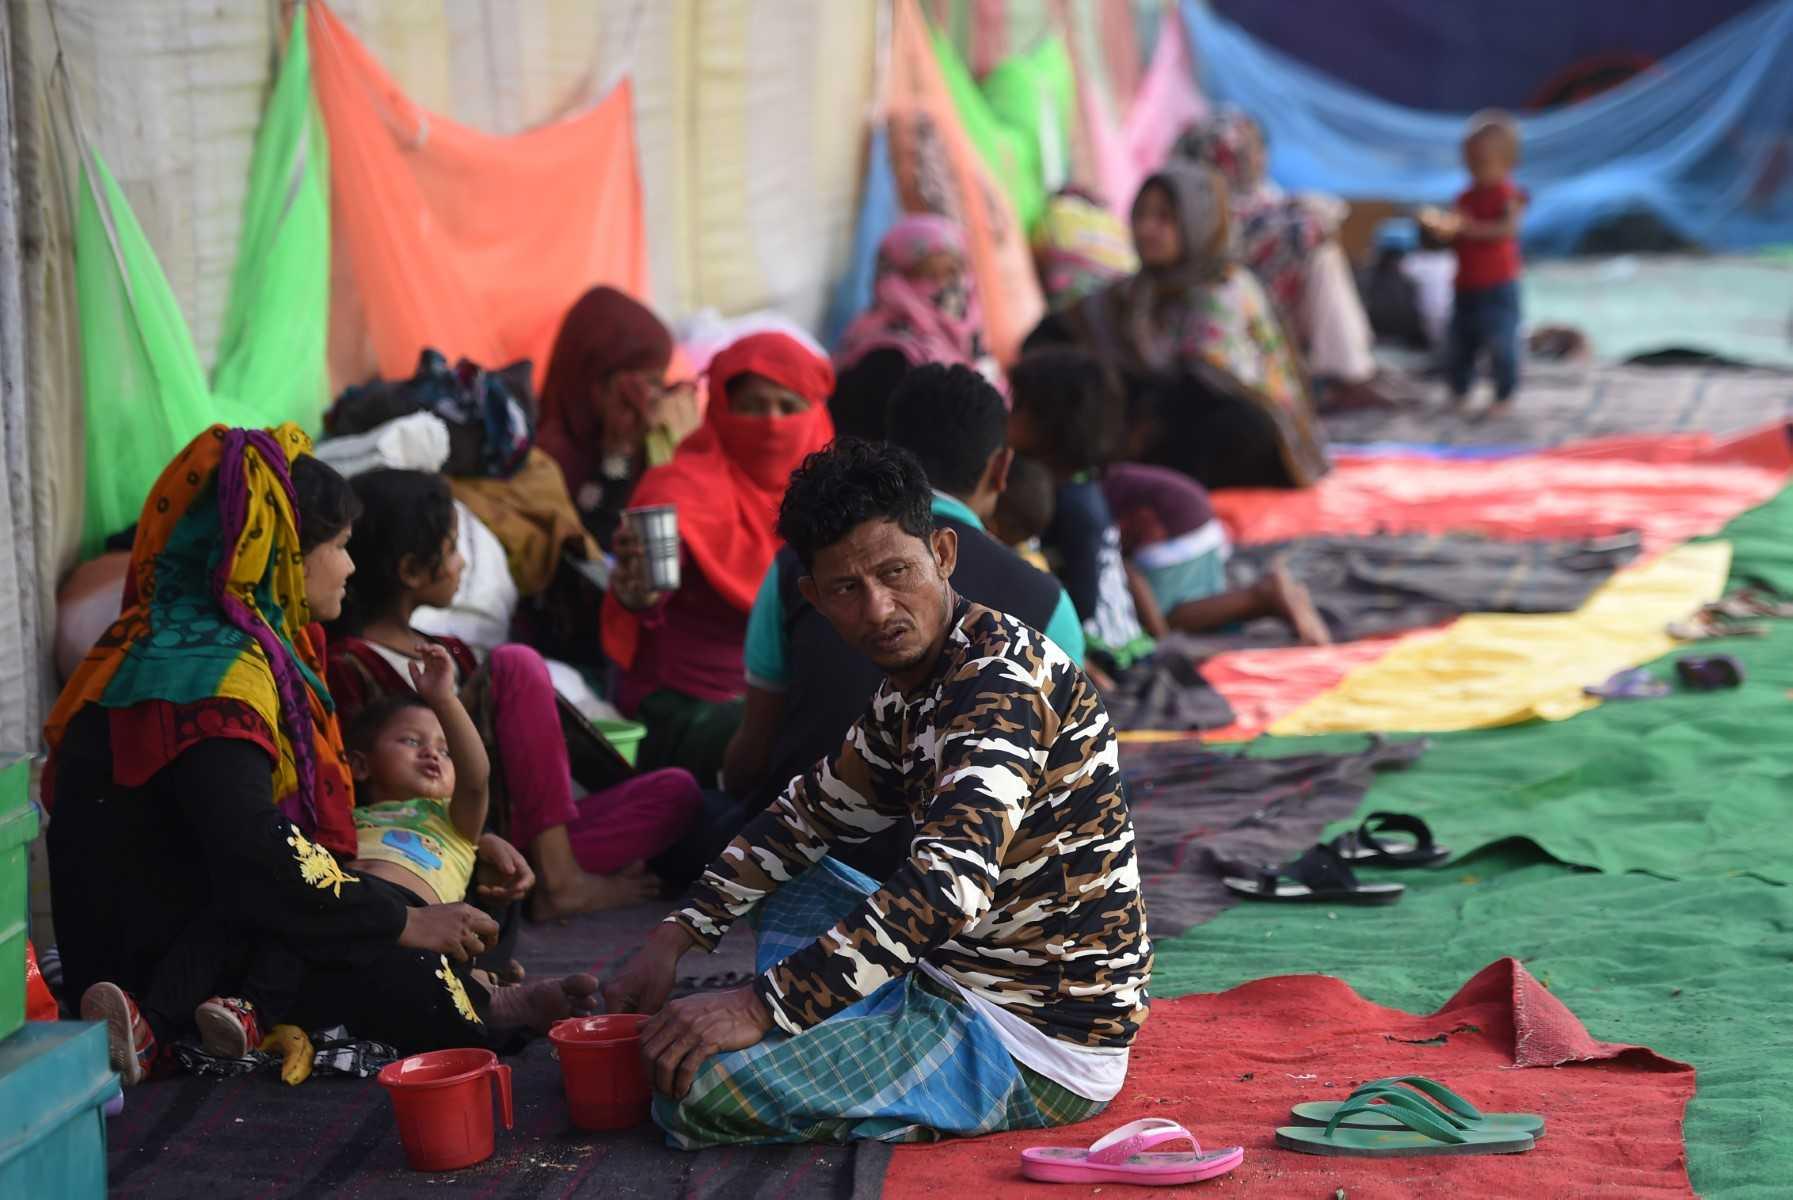 Rohingya refugees rest at a temporary shelter in New Delhi in this April 16, 2018 file photo. Photo: AFP